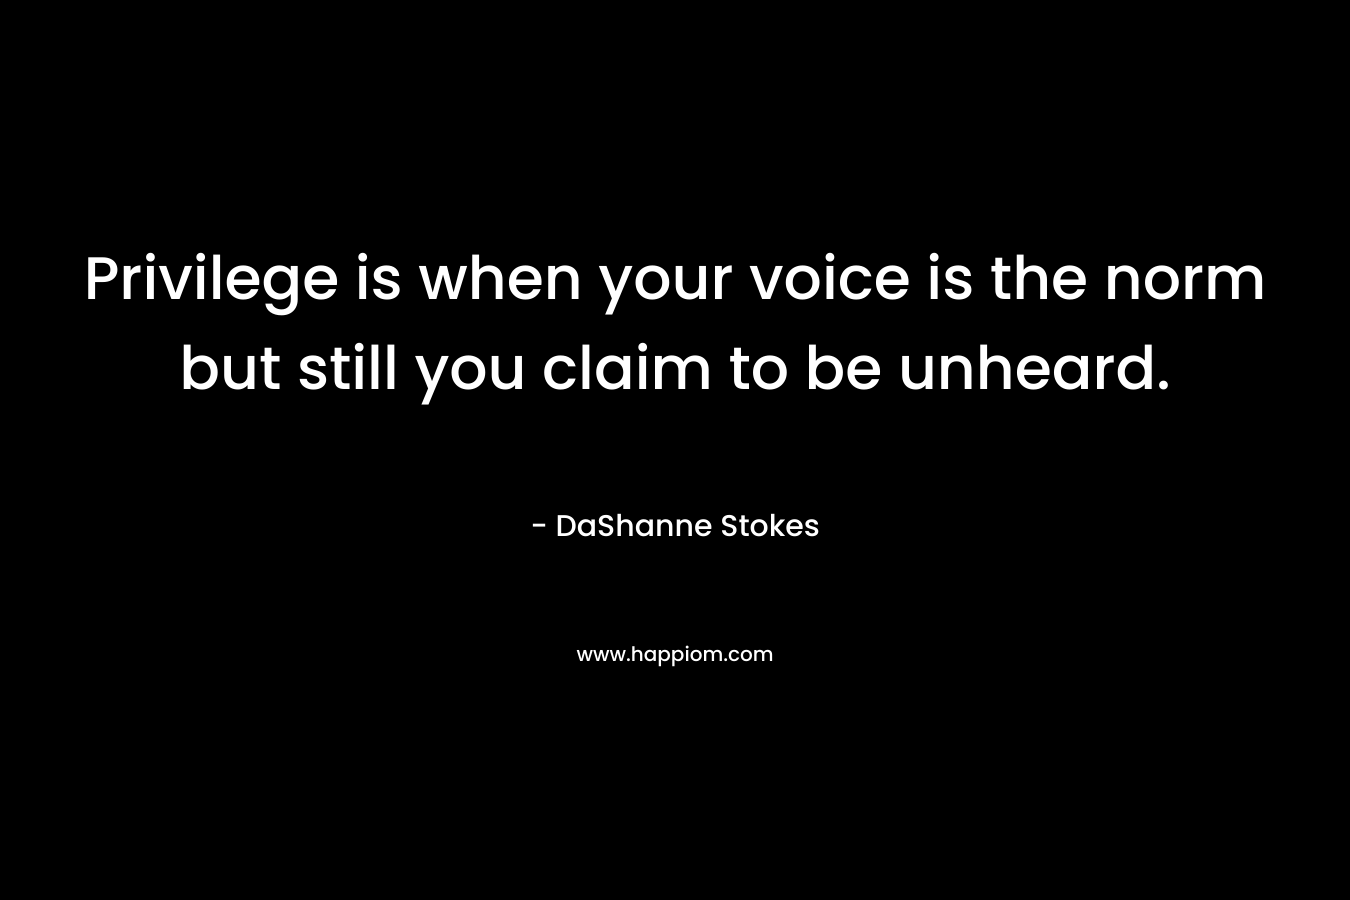 Privilege is when your voice is the norm but still you claim to be unheard. – DaShanne Stokes